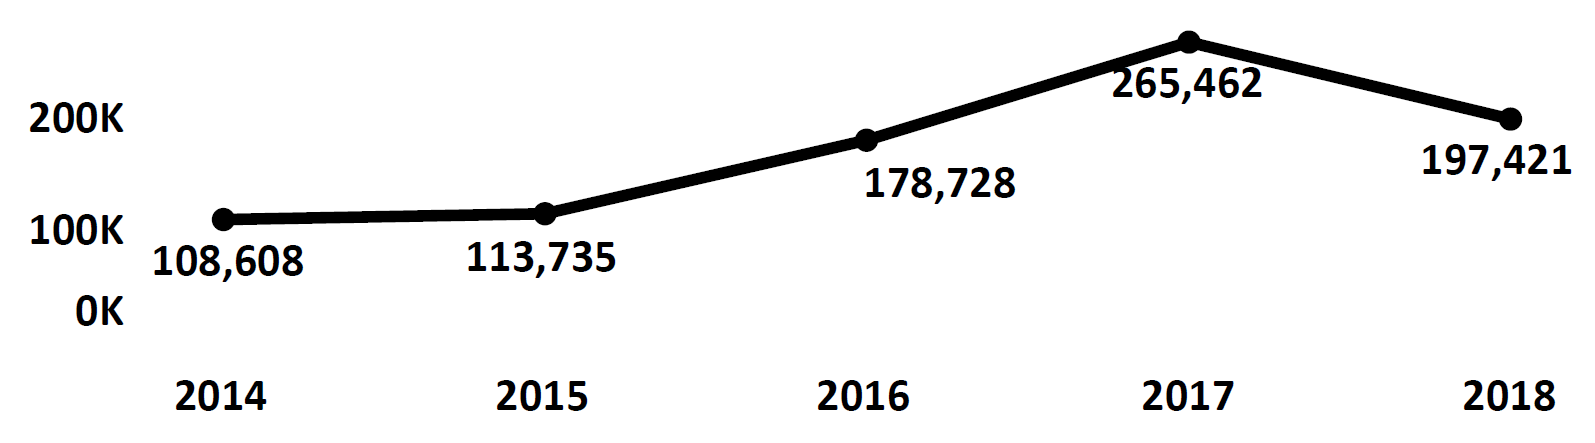 Graph of Do Not Call complaints recorded in Michigan from fiscal year 2014 to fiscal year 2018. In 2014 there were 108,608 complaints filed, which increased each year peaking at 265,462 in 2017. In 2018 there were 197,421 complaints filed, fewer than 2017.